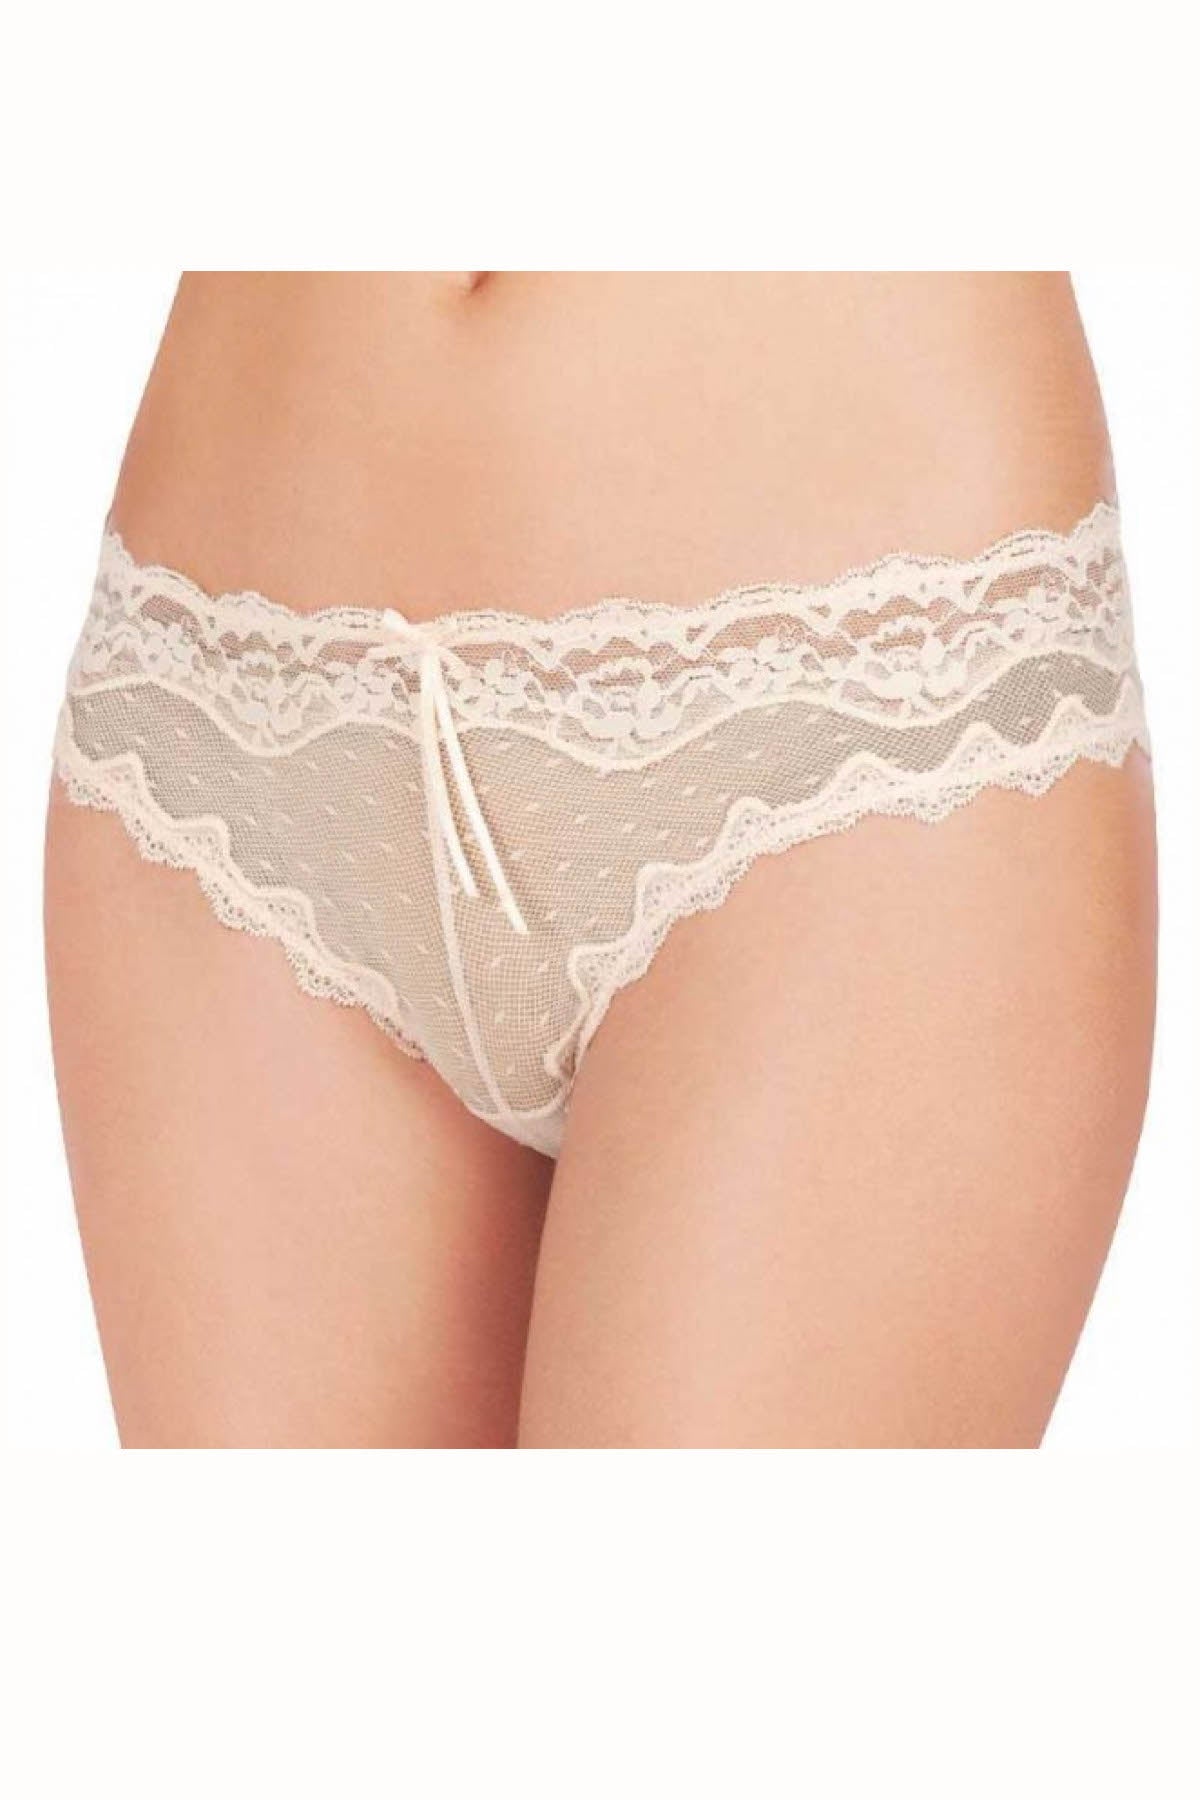 HEIDI By Heidi Klum Silver-Peony Mesh and Lace Dot Hipster